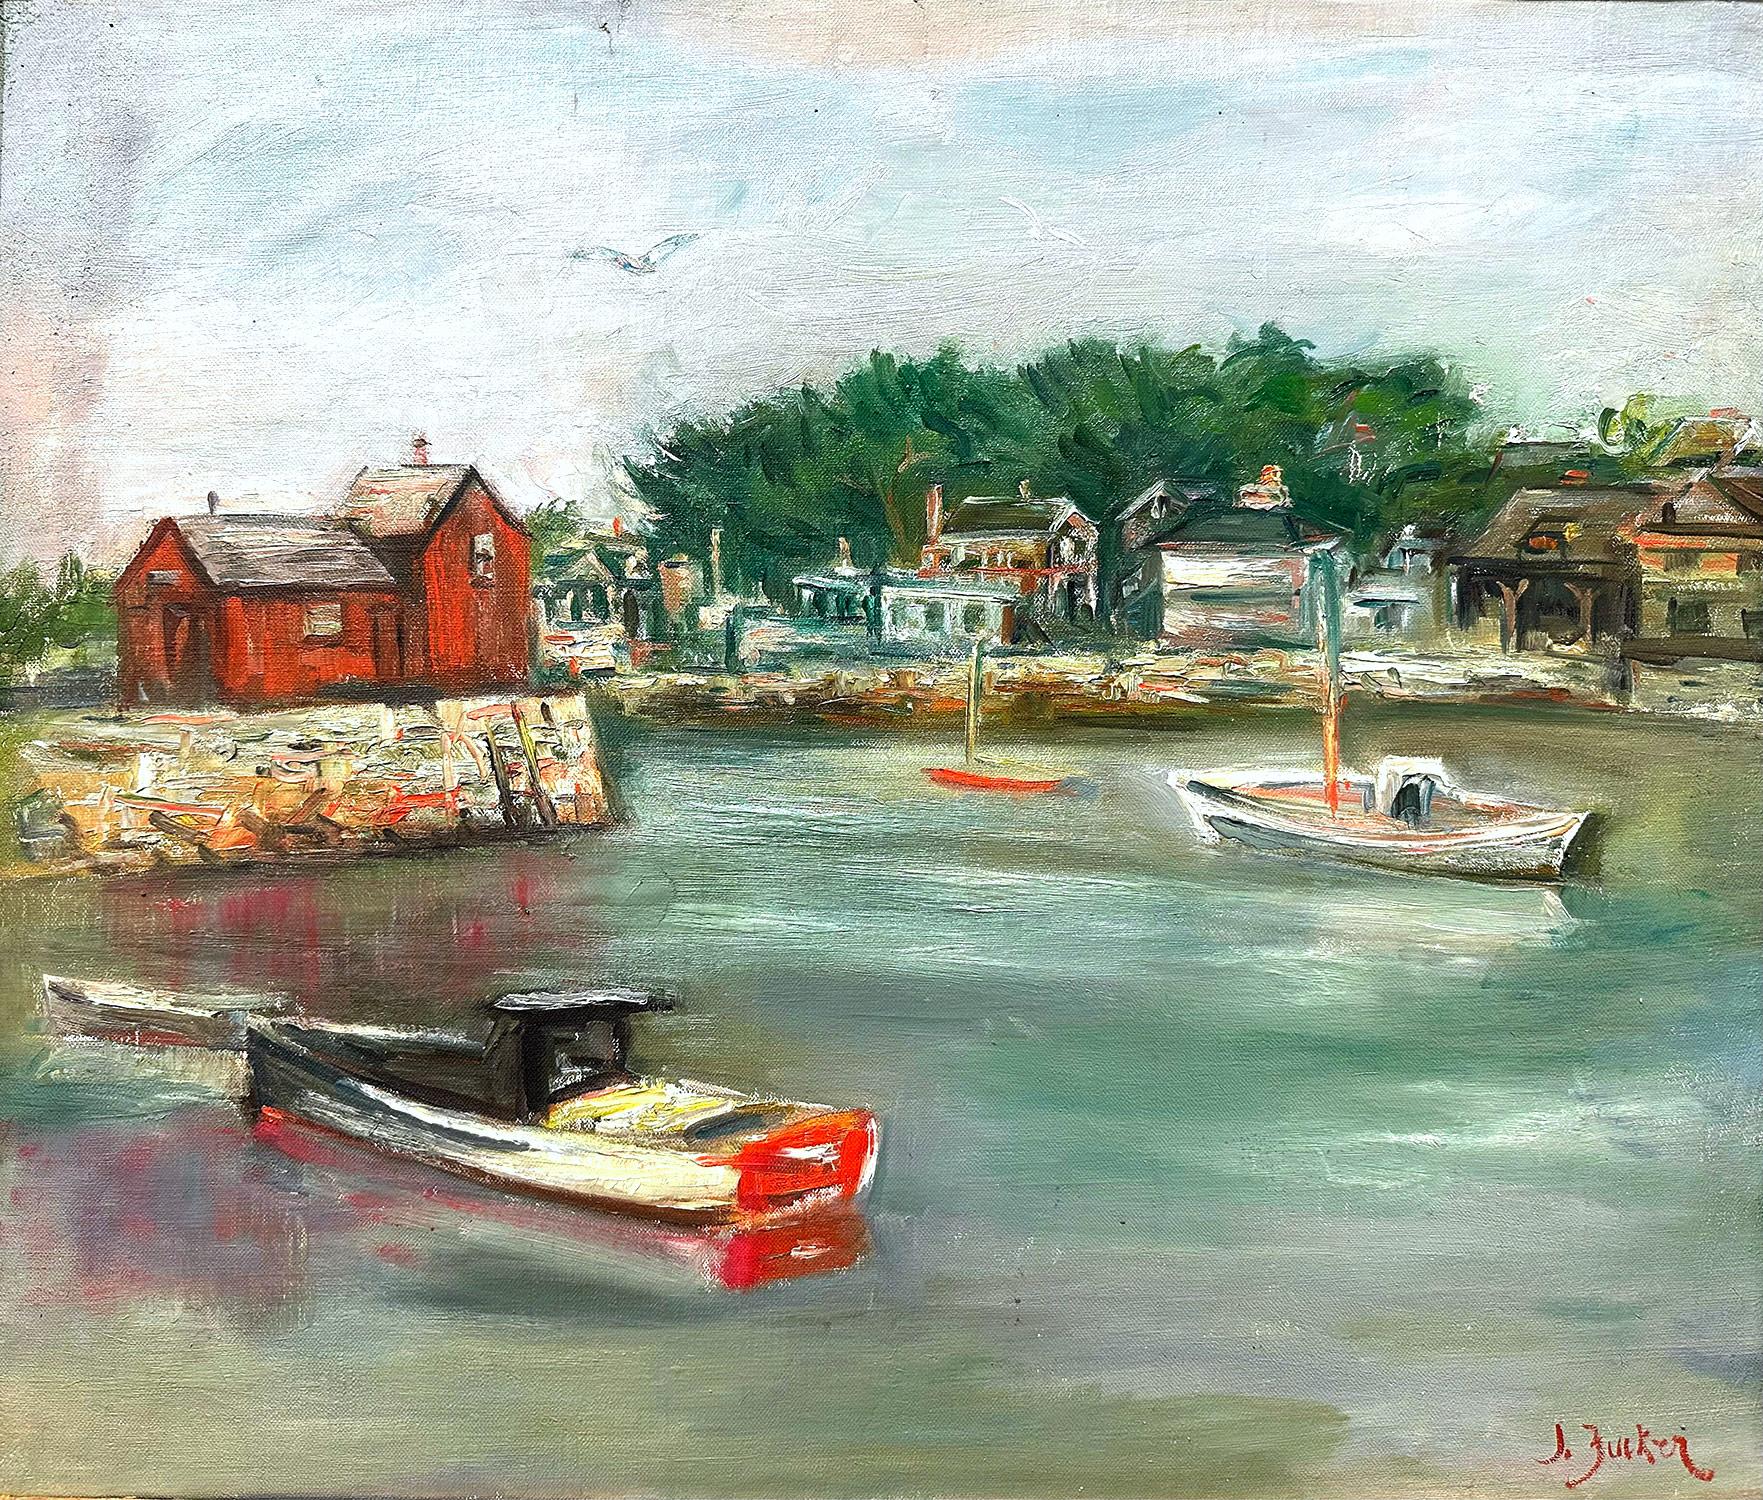 This painting depicts a whimsical seascape of a Connecticut town with the village houses and buildings ashore, with a few boats anchored in the area. The bright colors and quick brush strokes are what makes this painting so attractive and desirable.